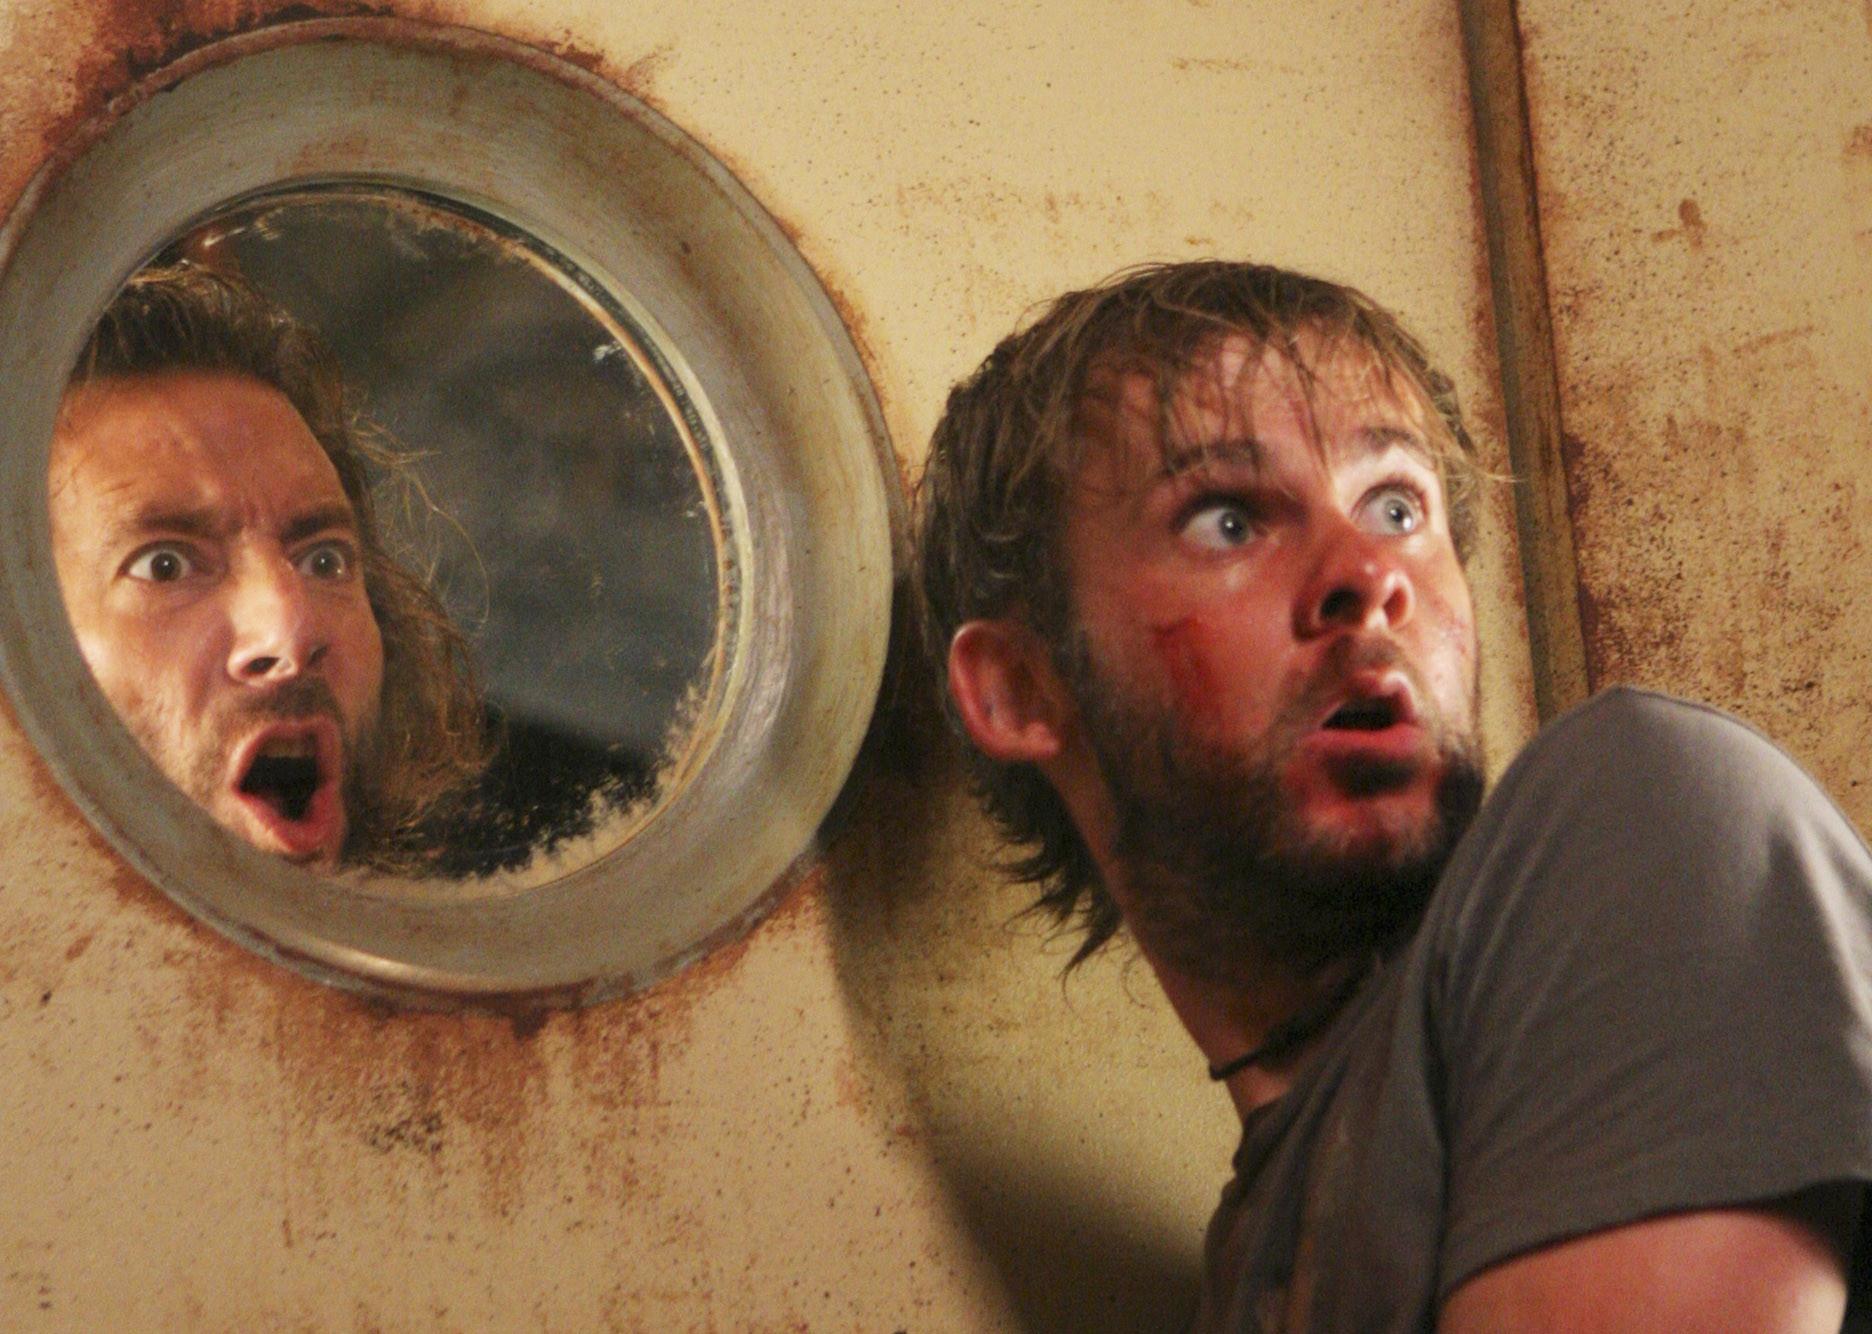 Two men stand looking shocked with a door and a small porthole window between them.